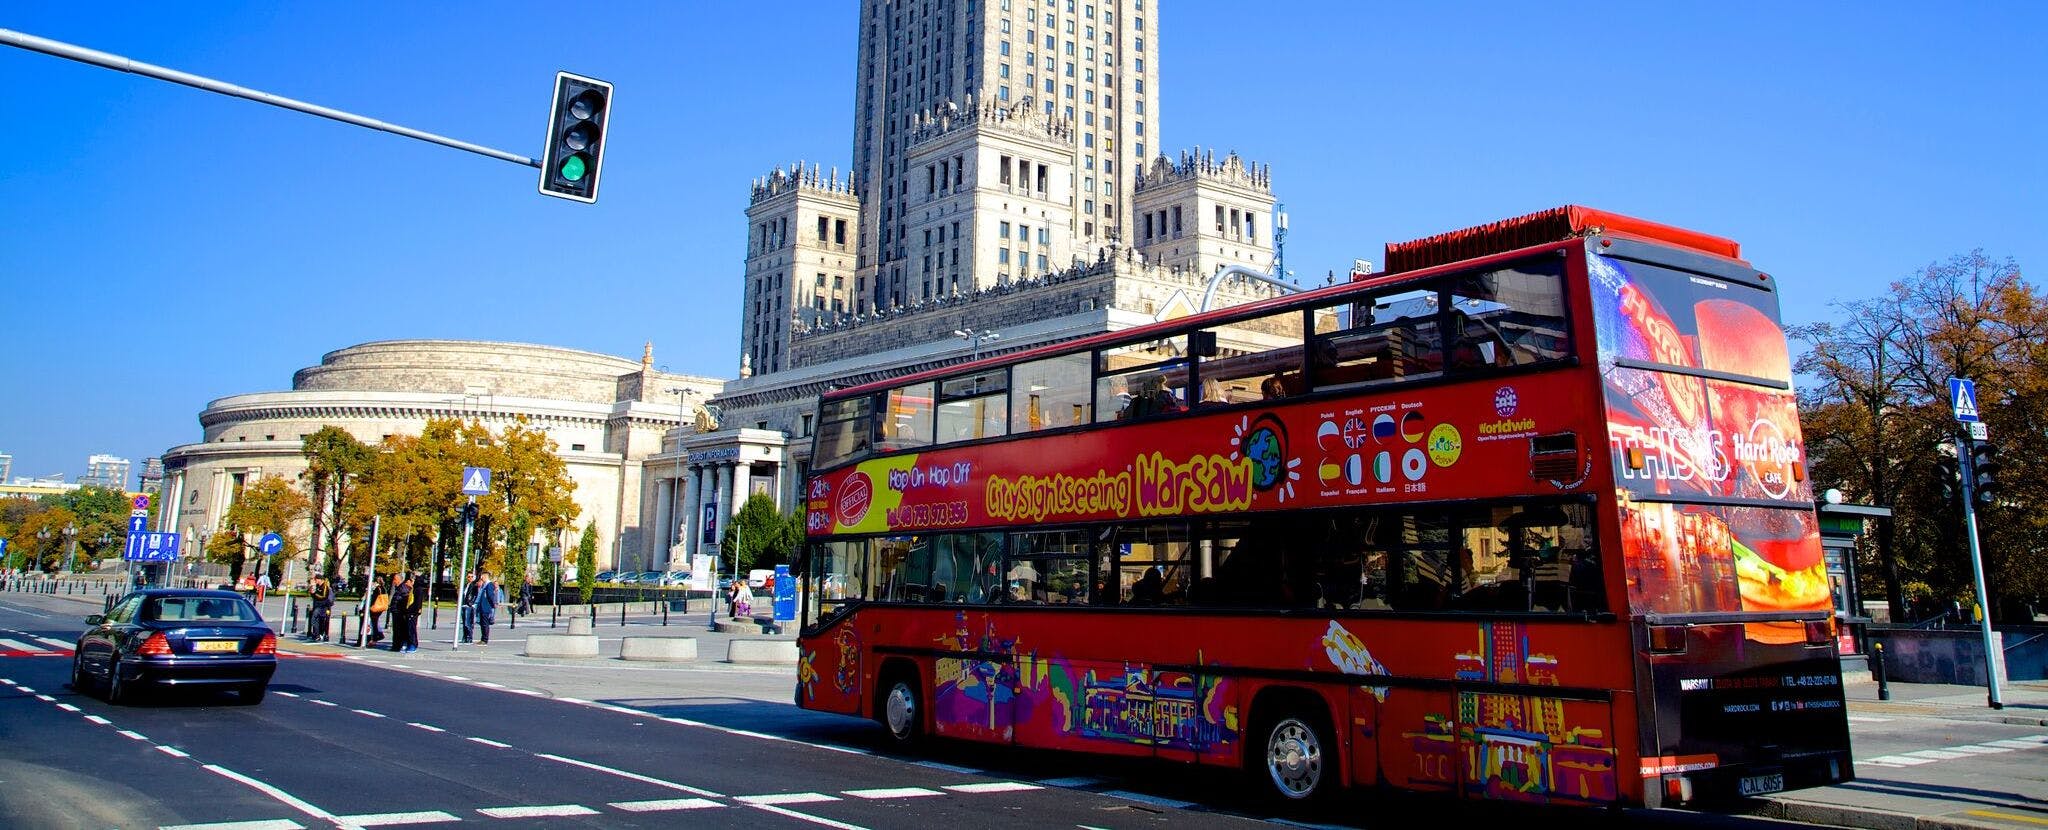 City Sightseeing hop-on hop-off bus tour of Warsaw